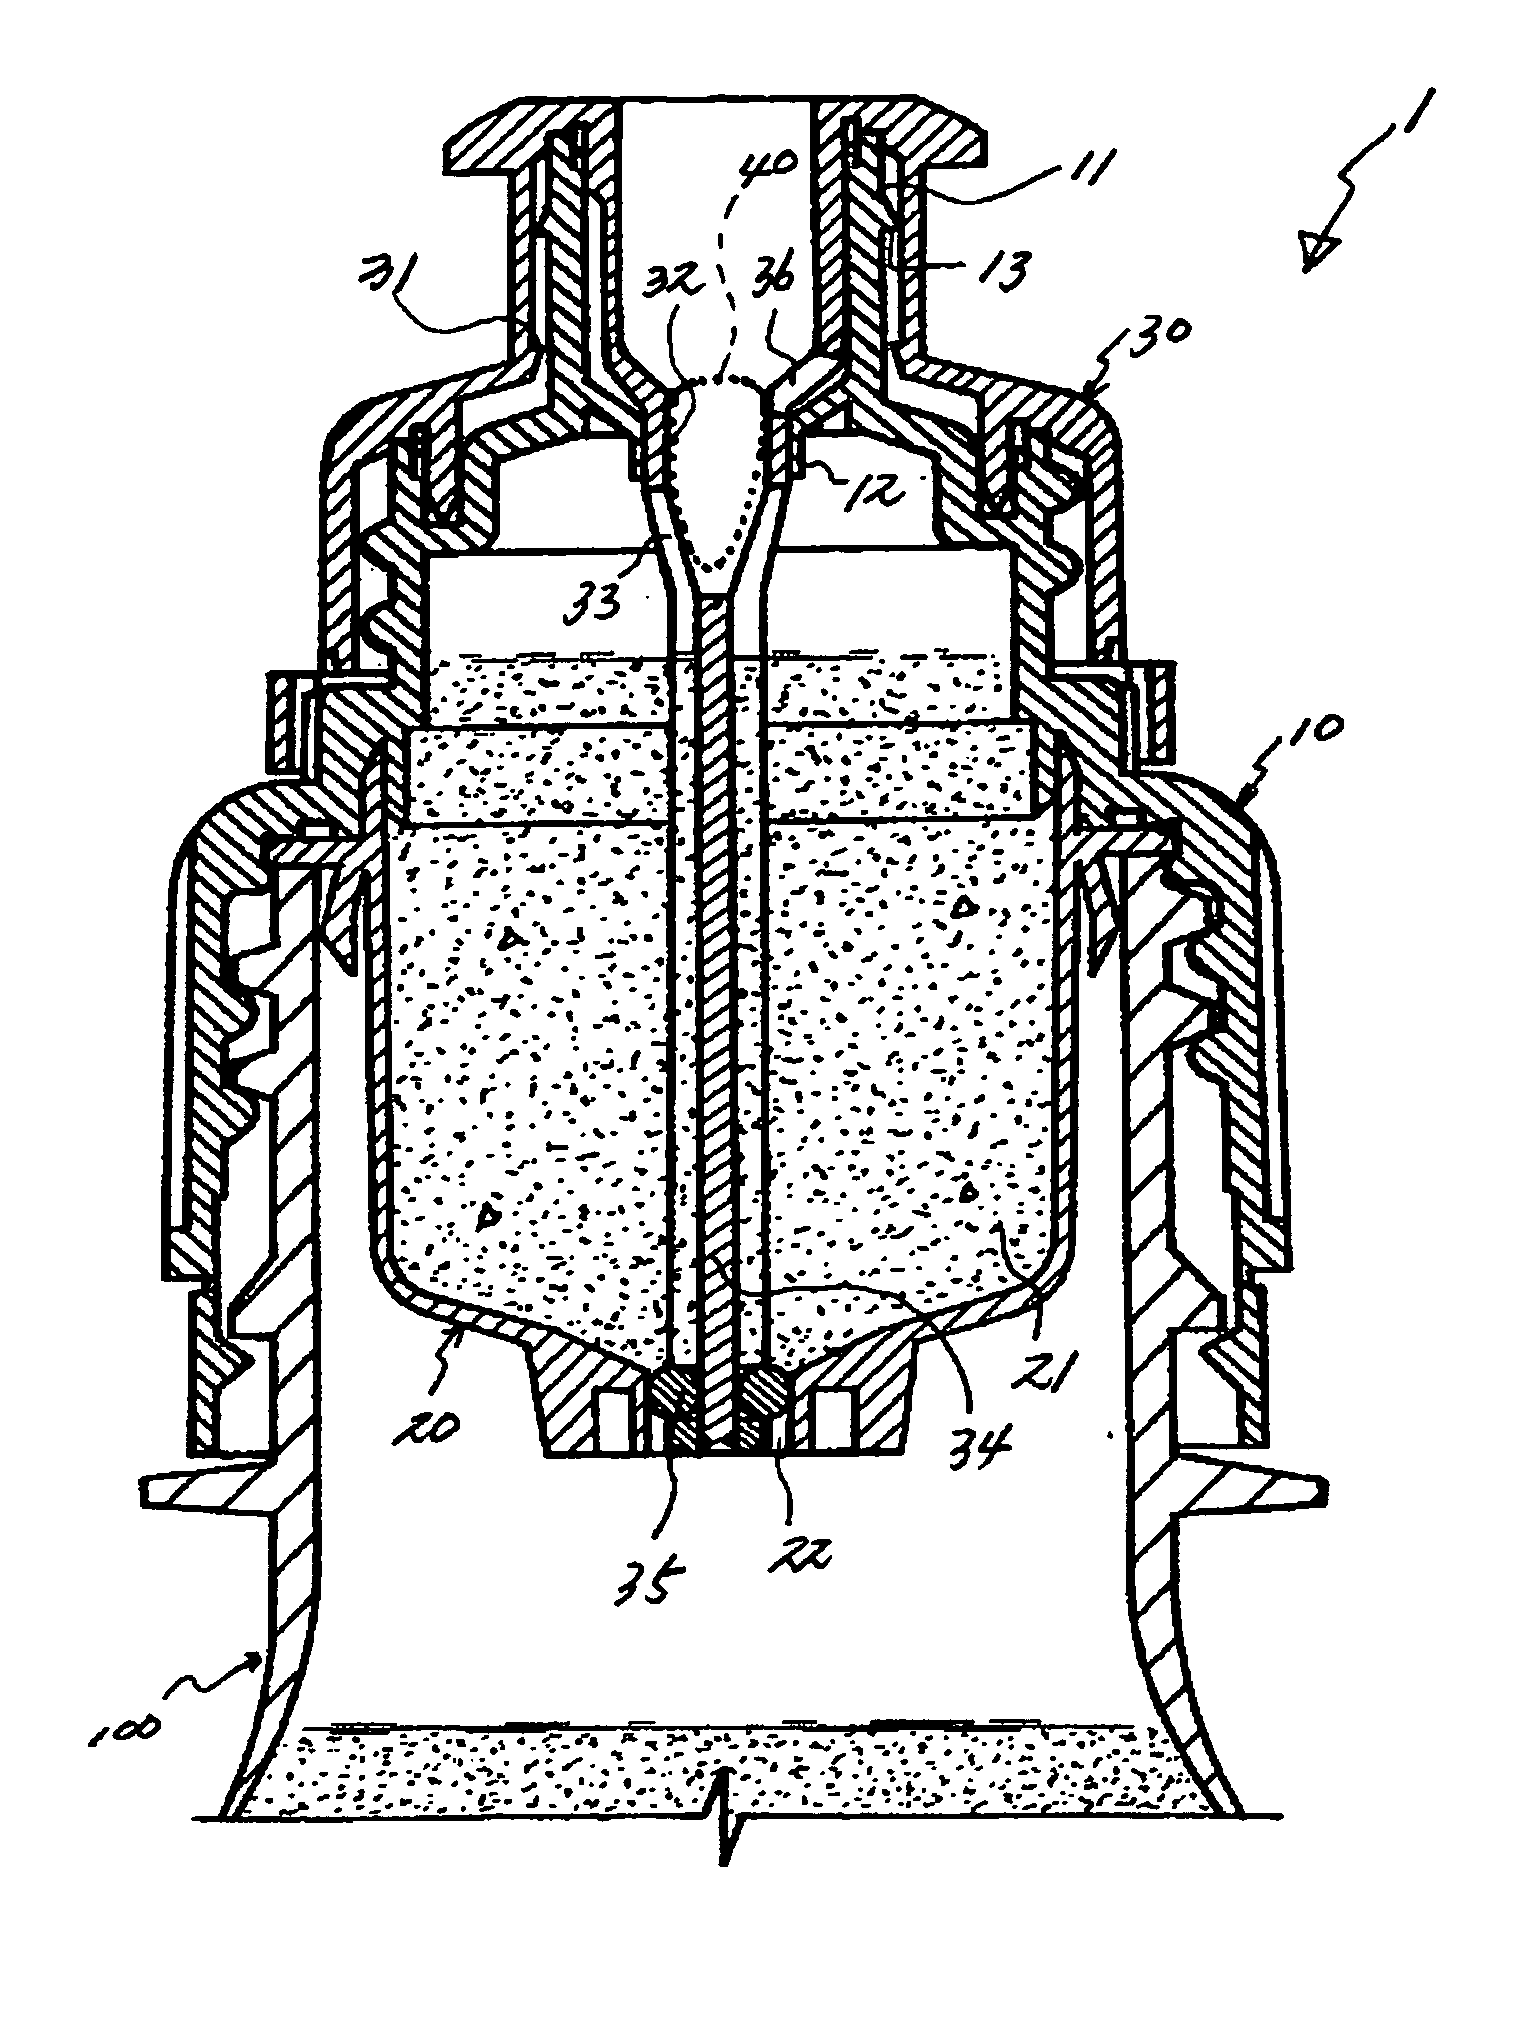 Cap assembly having storage chamber for secondary material with inseparable working member